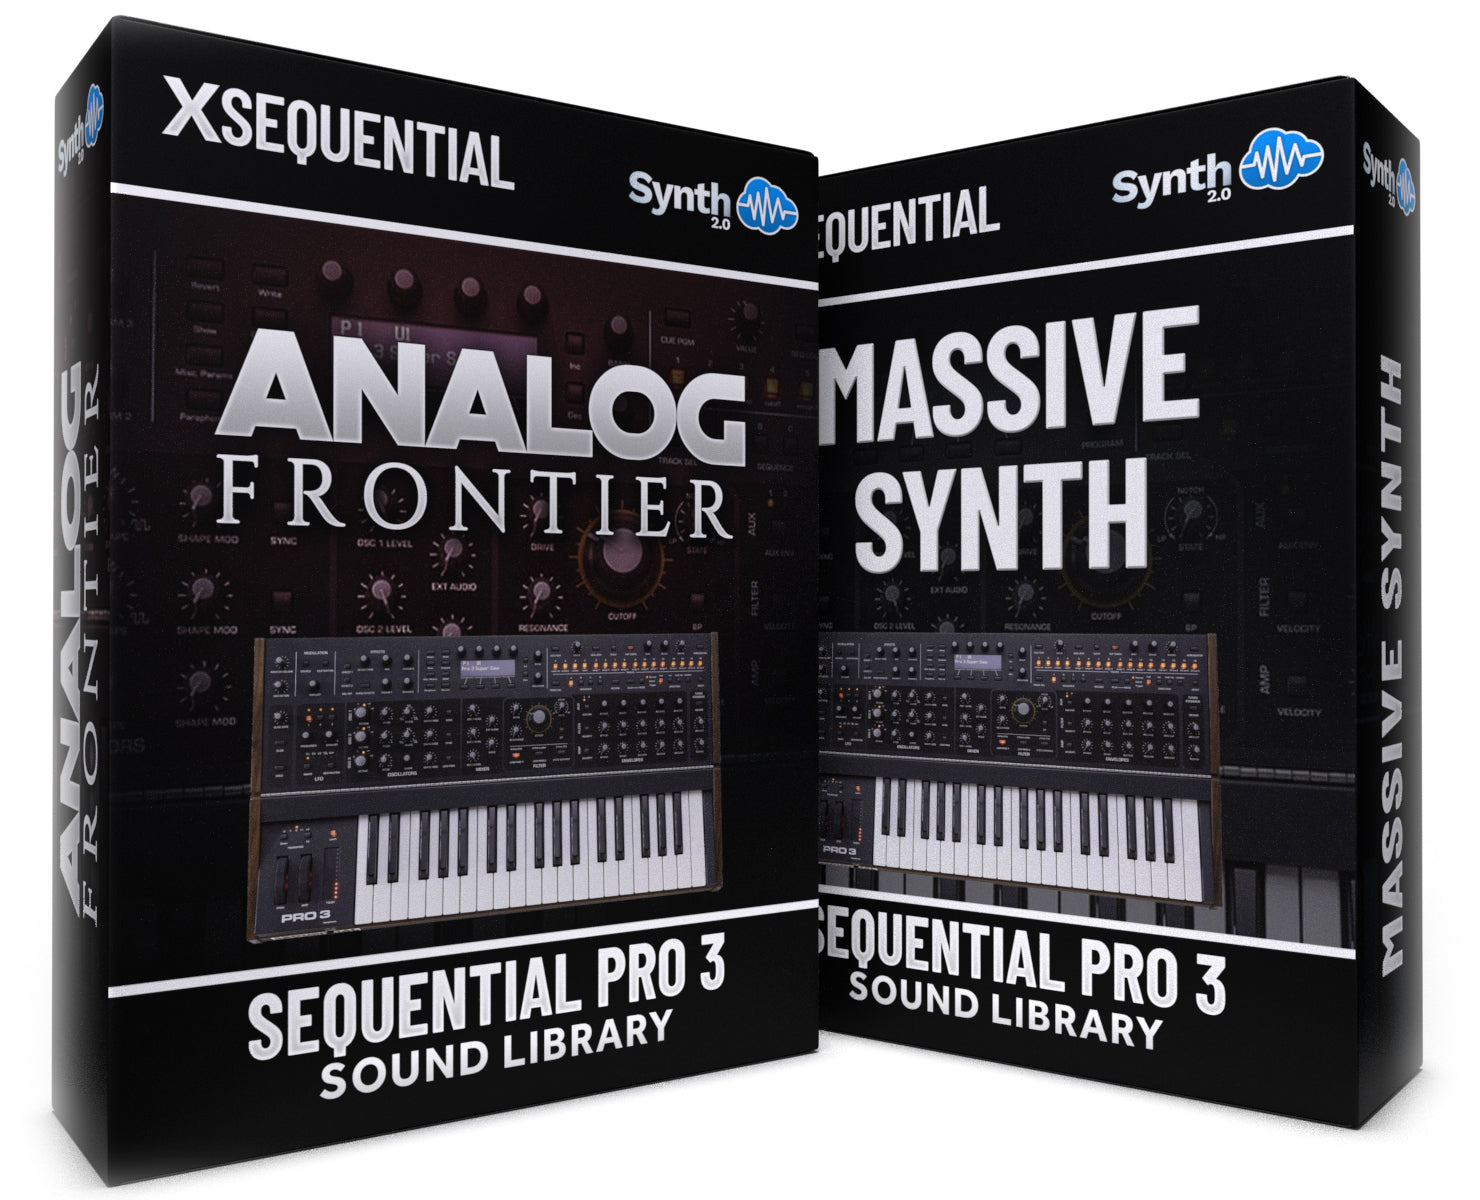 SCL457 - ( Bundle ) - Analog Frontier + Massive Synth - Sequential Pro 3